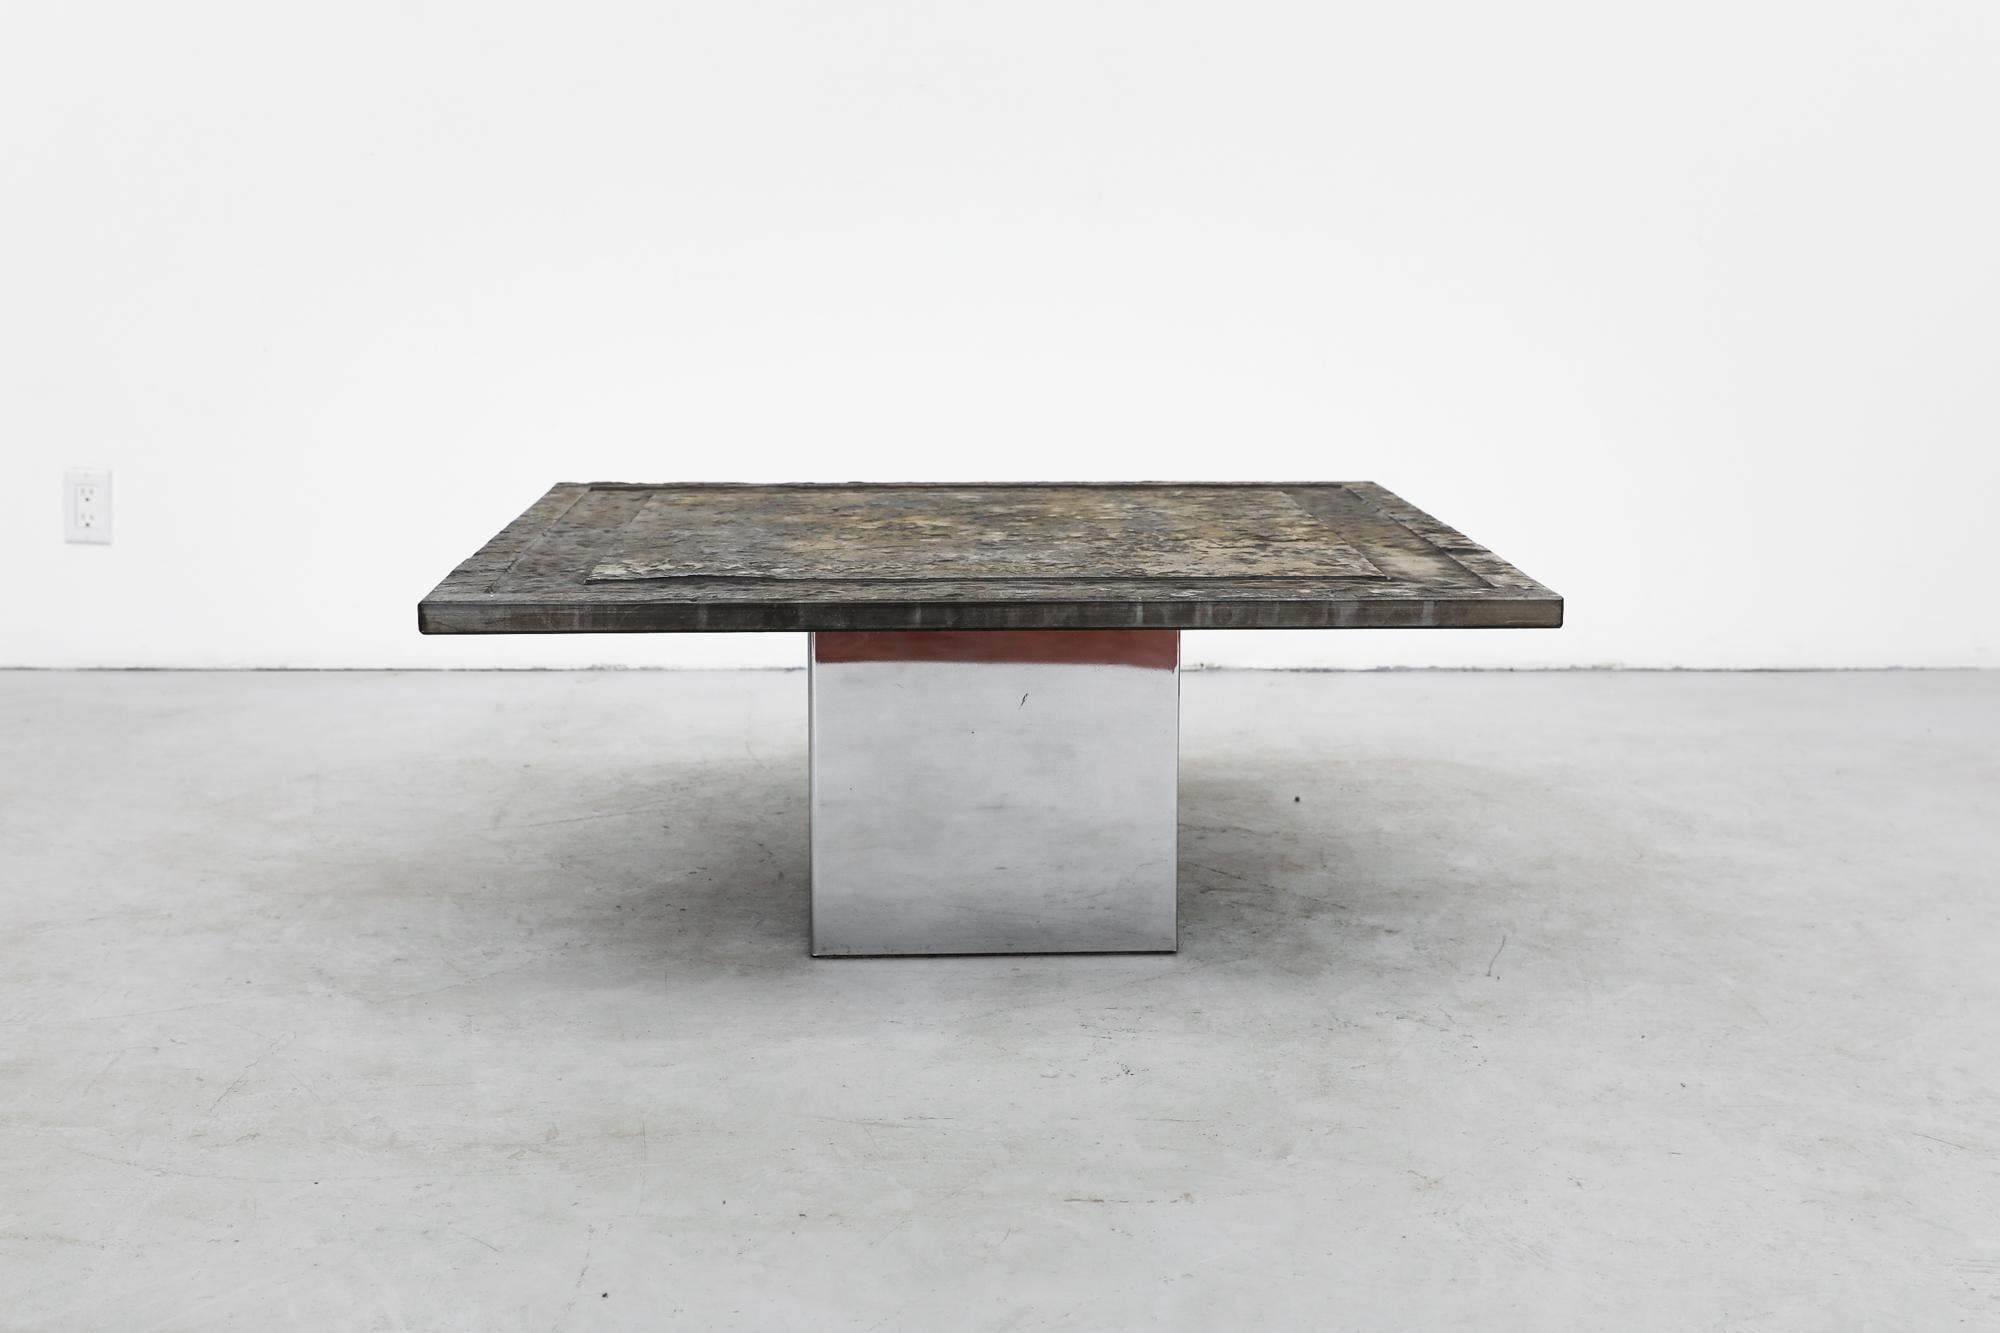 Brutalist coffee table with stone top and chrome pedestal base. The stone top has deeper carved inset border. In original condition with visible wear consistent with its age and use.